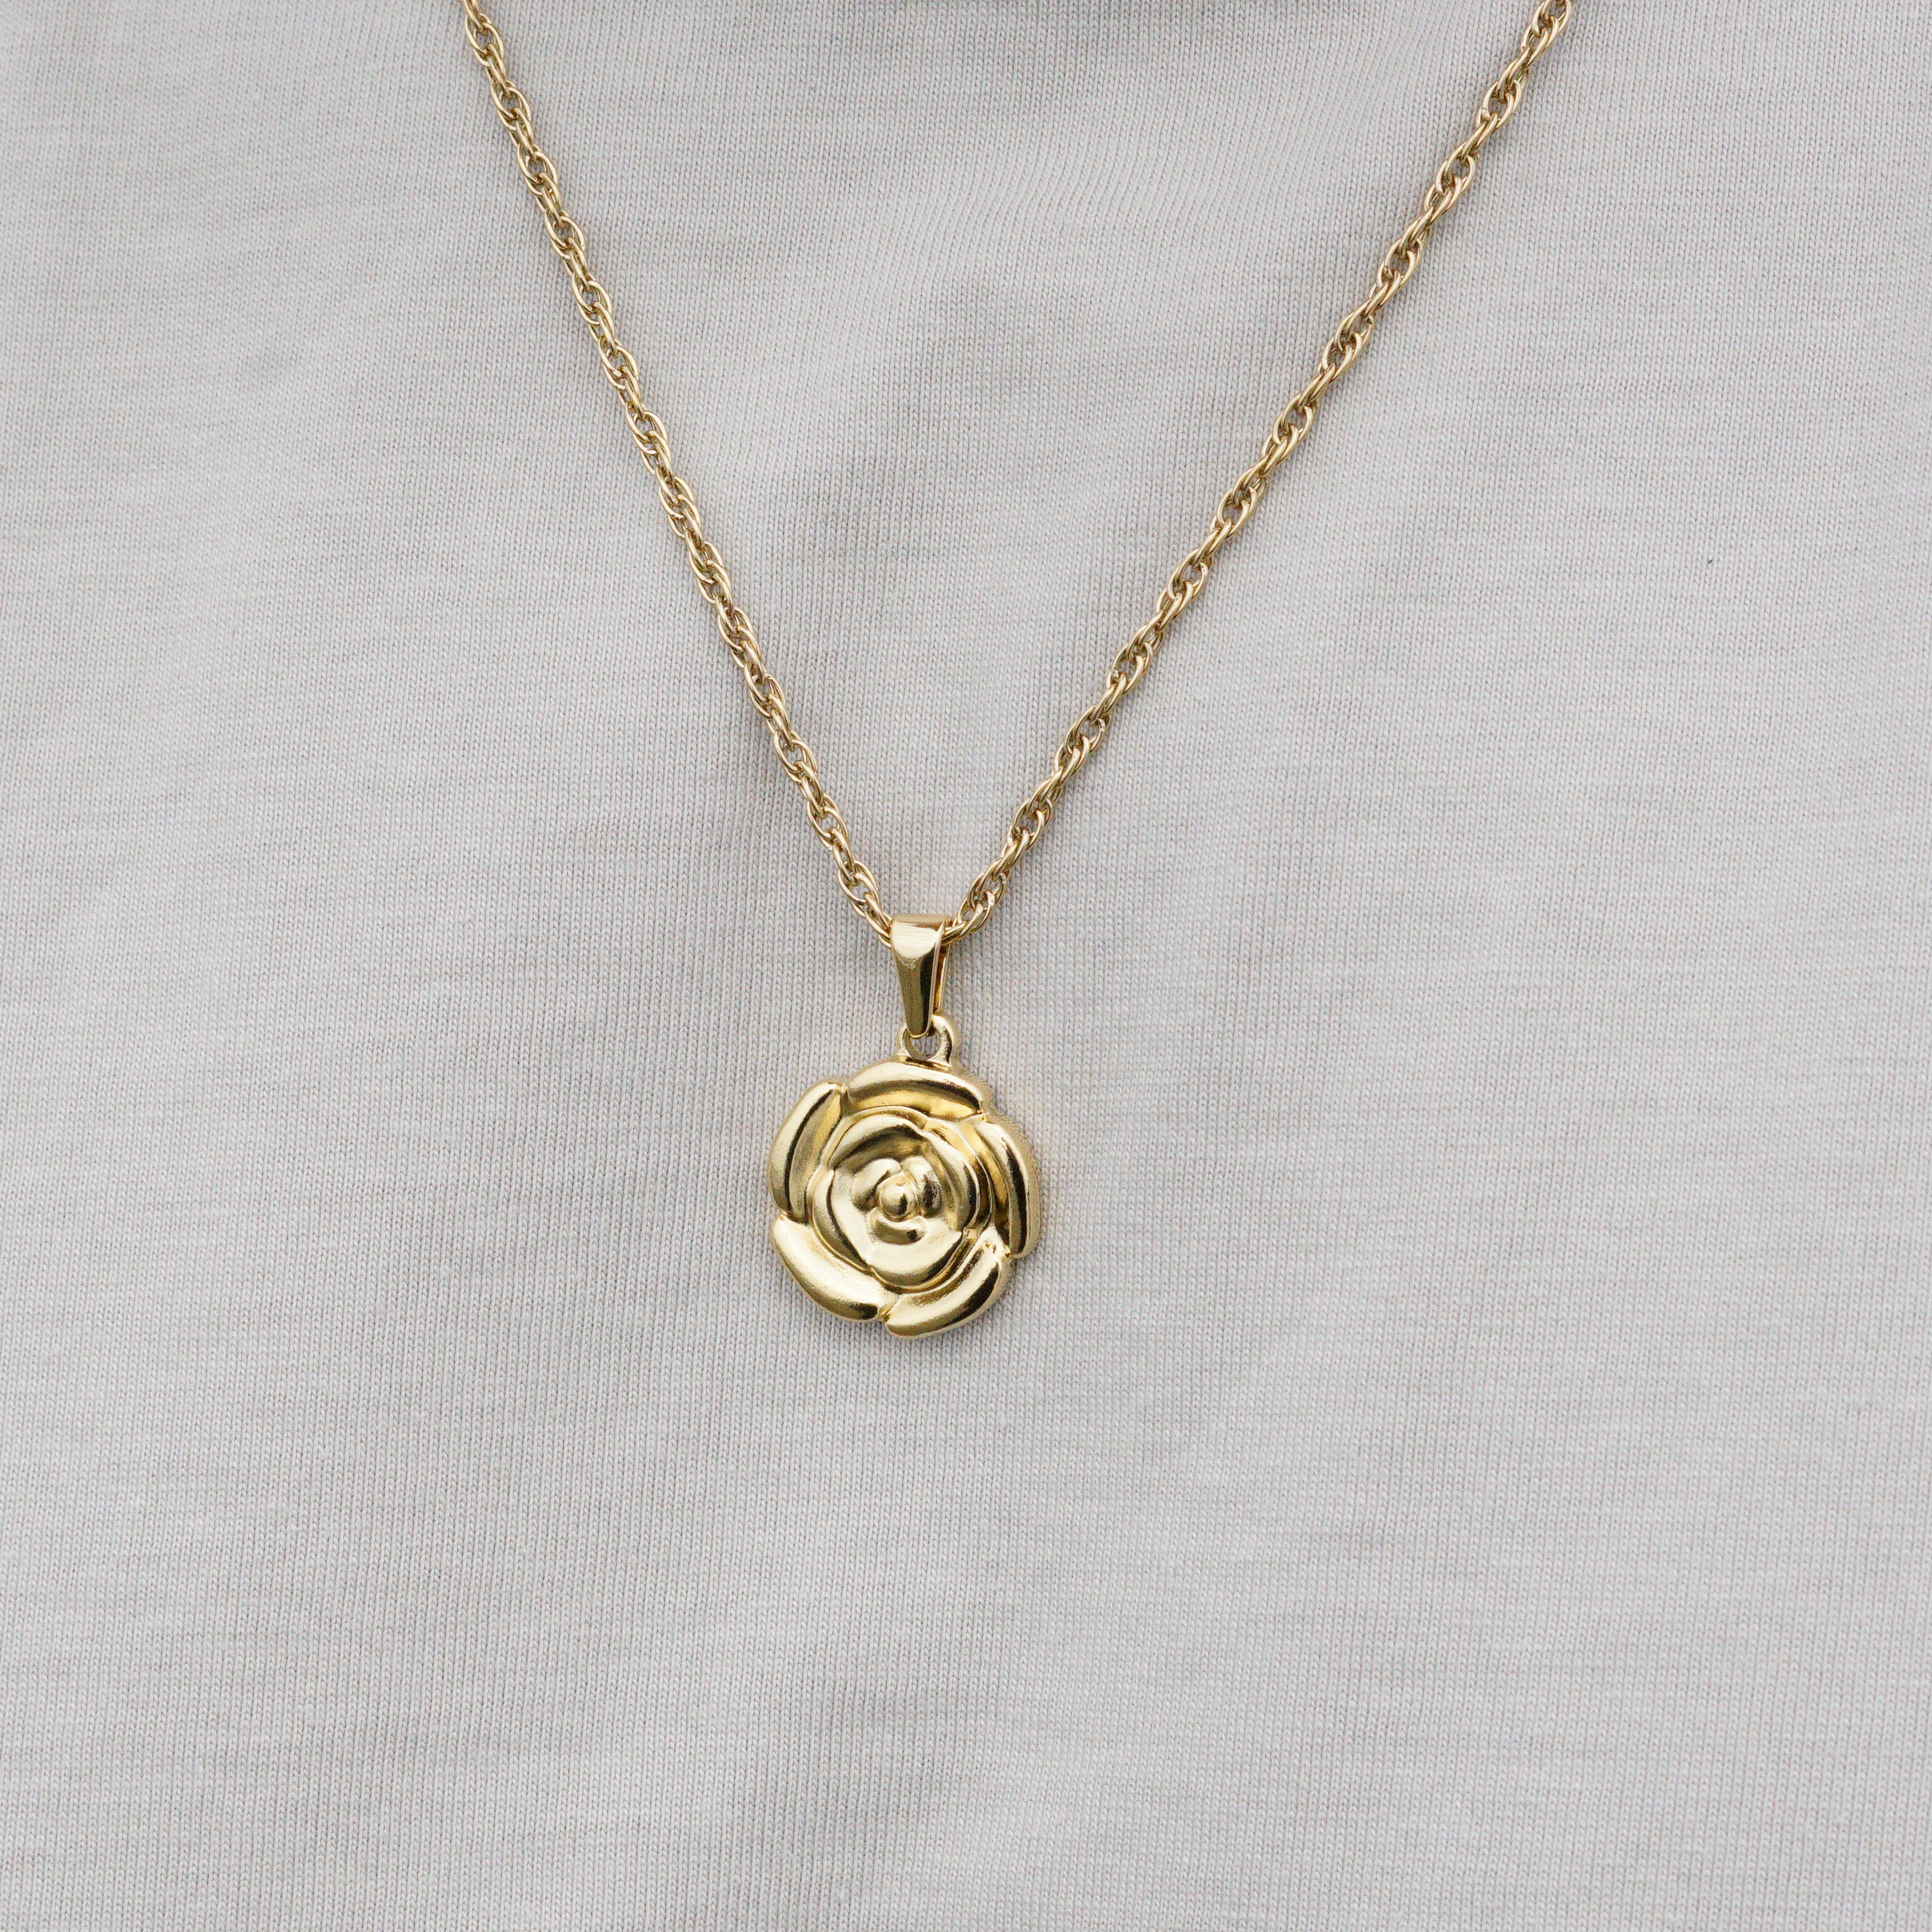 ROSEHEAD NECKLACE - GOLD TONE